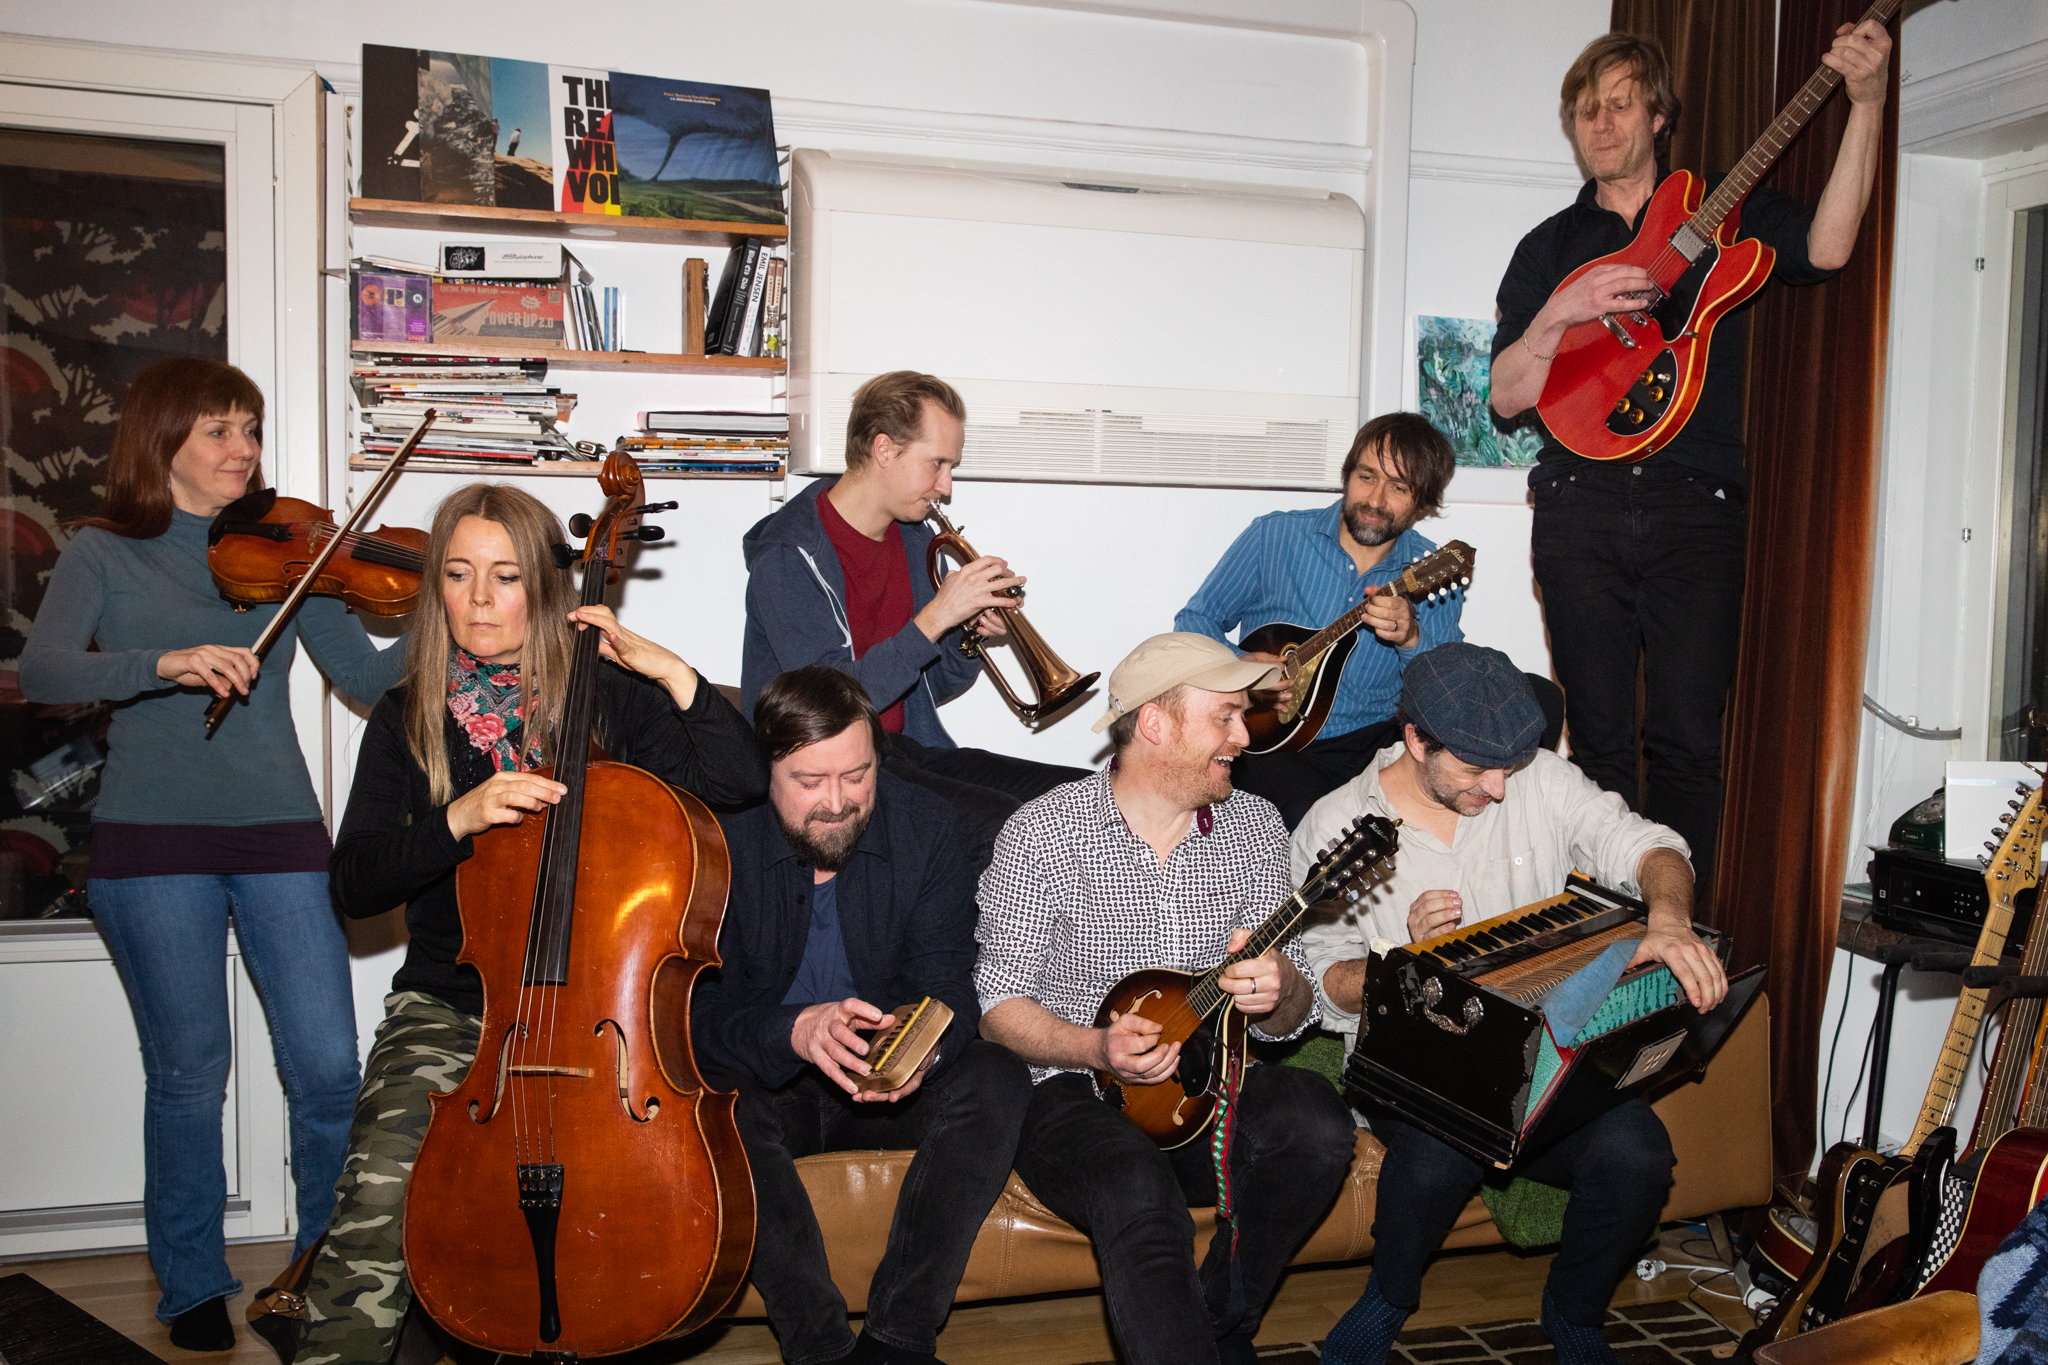 James Yorkston, Nina Persson + The Second Hand Orchestra